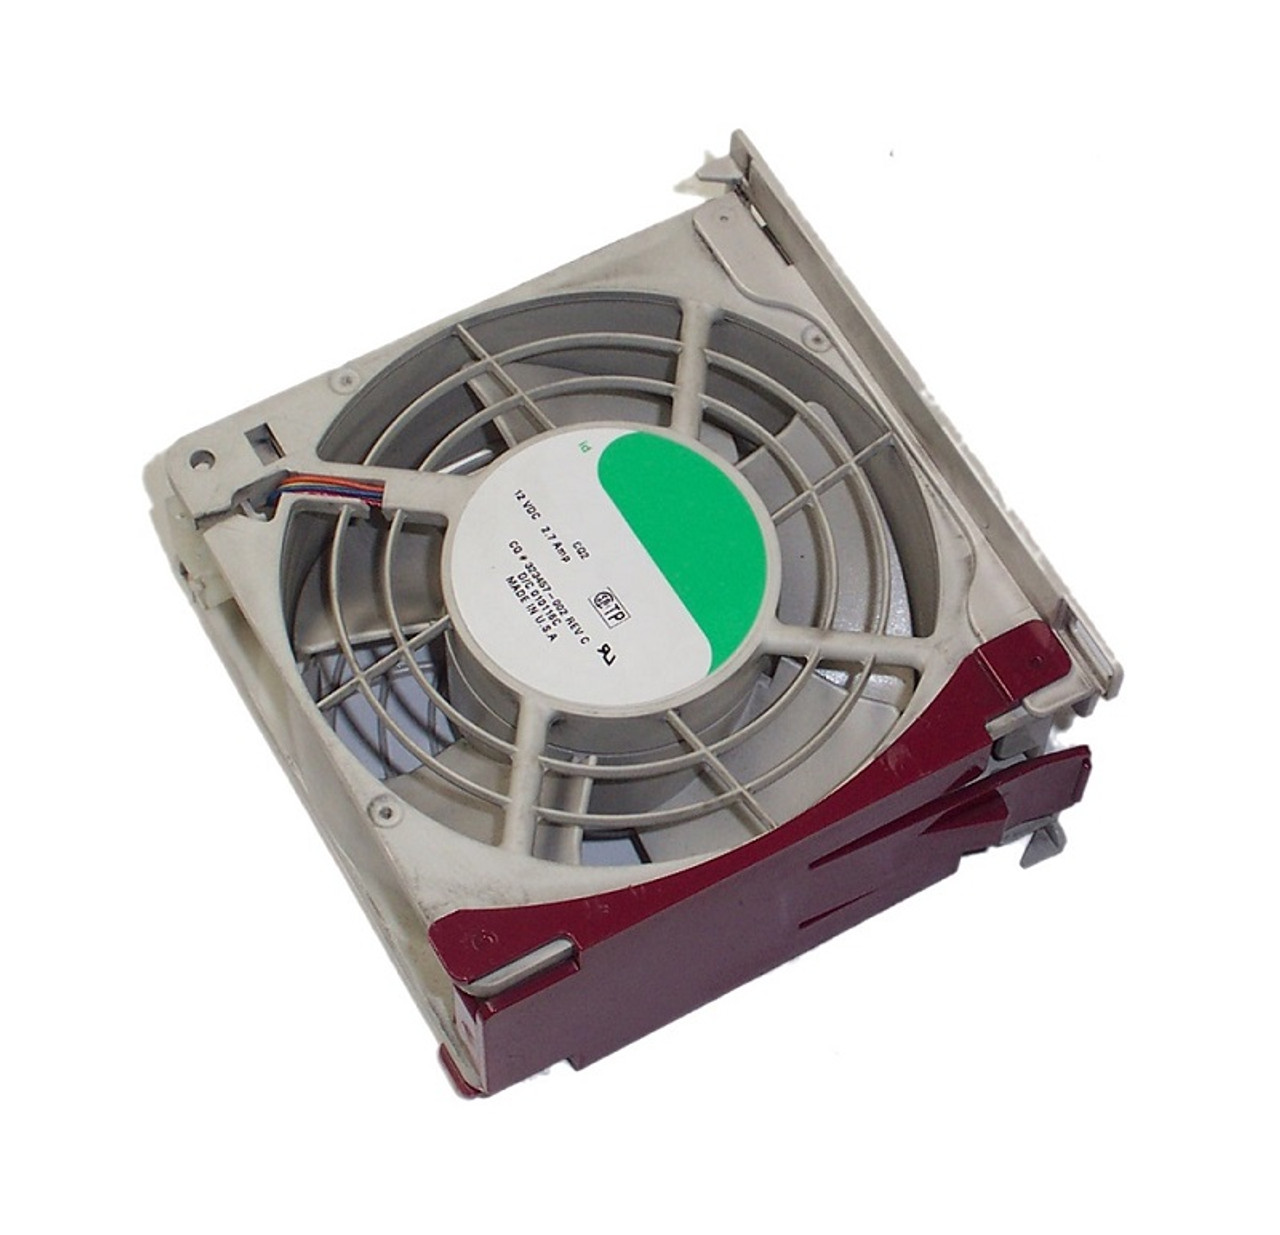 122225-001 - HP Hot-pluggable System Fan for ProLiant Ml530 G2 Ml570 G2